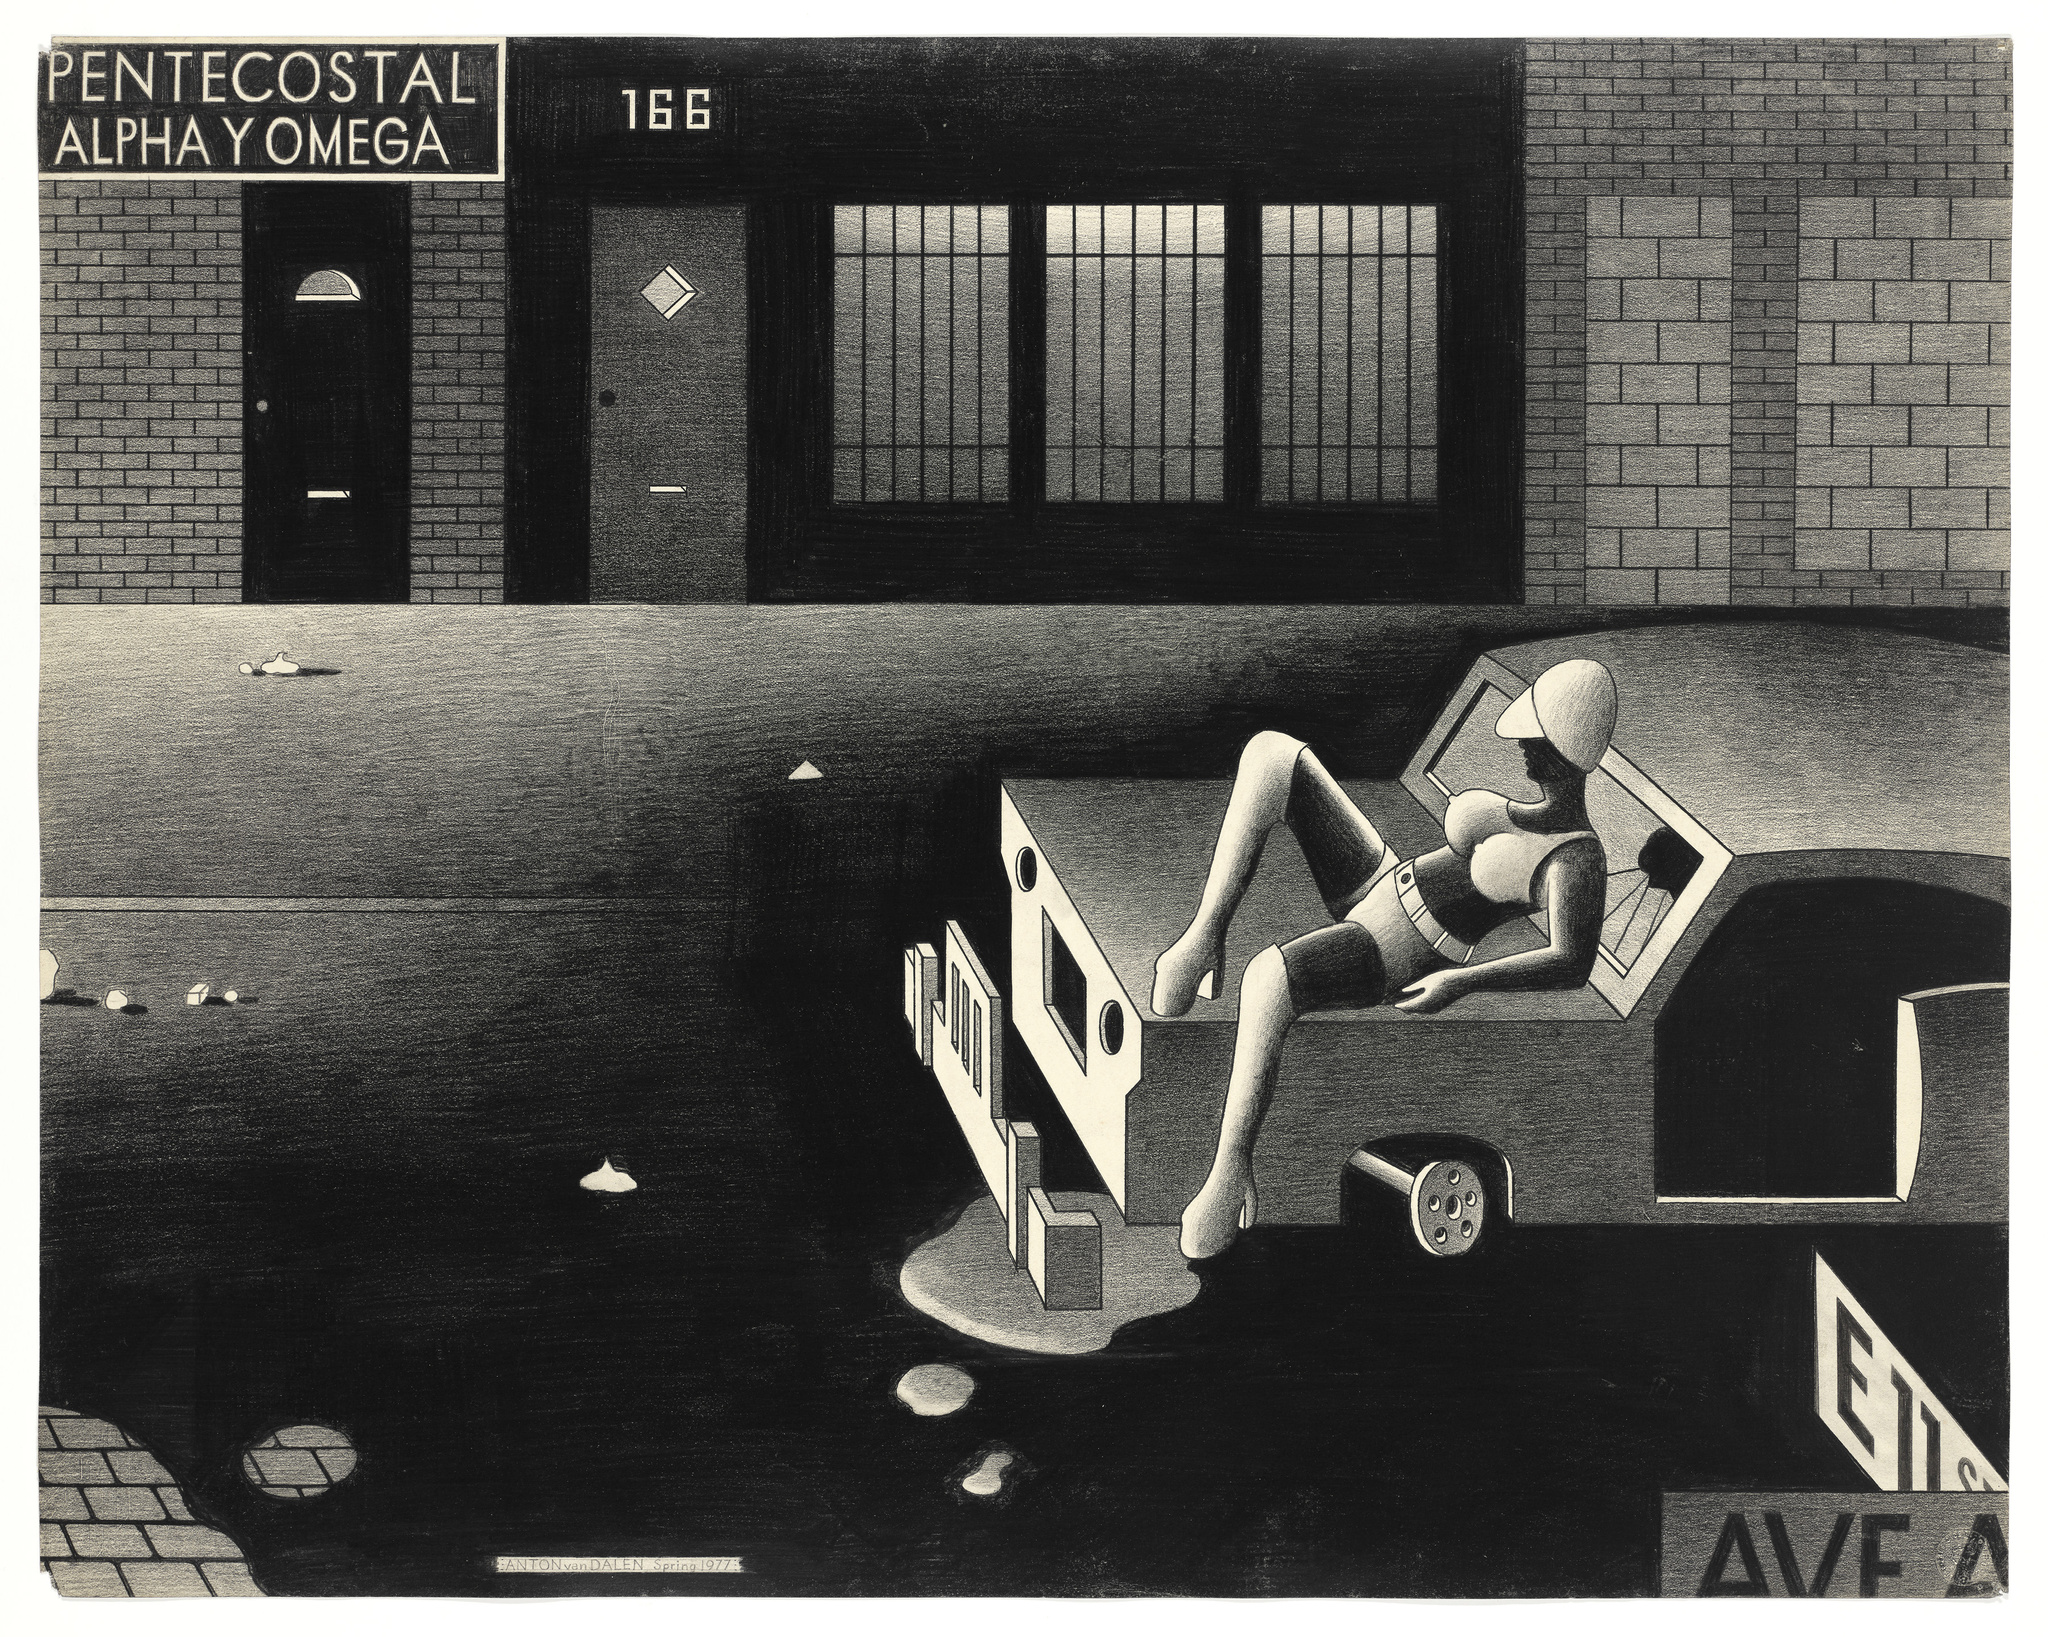 A woman in a cap, bra, shorts, and knee-high platform boots leans back on the hood of a parked car. A nearby building's sign reads Pentecostal Alpha y Omega.